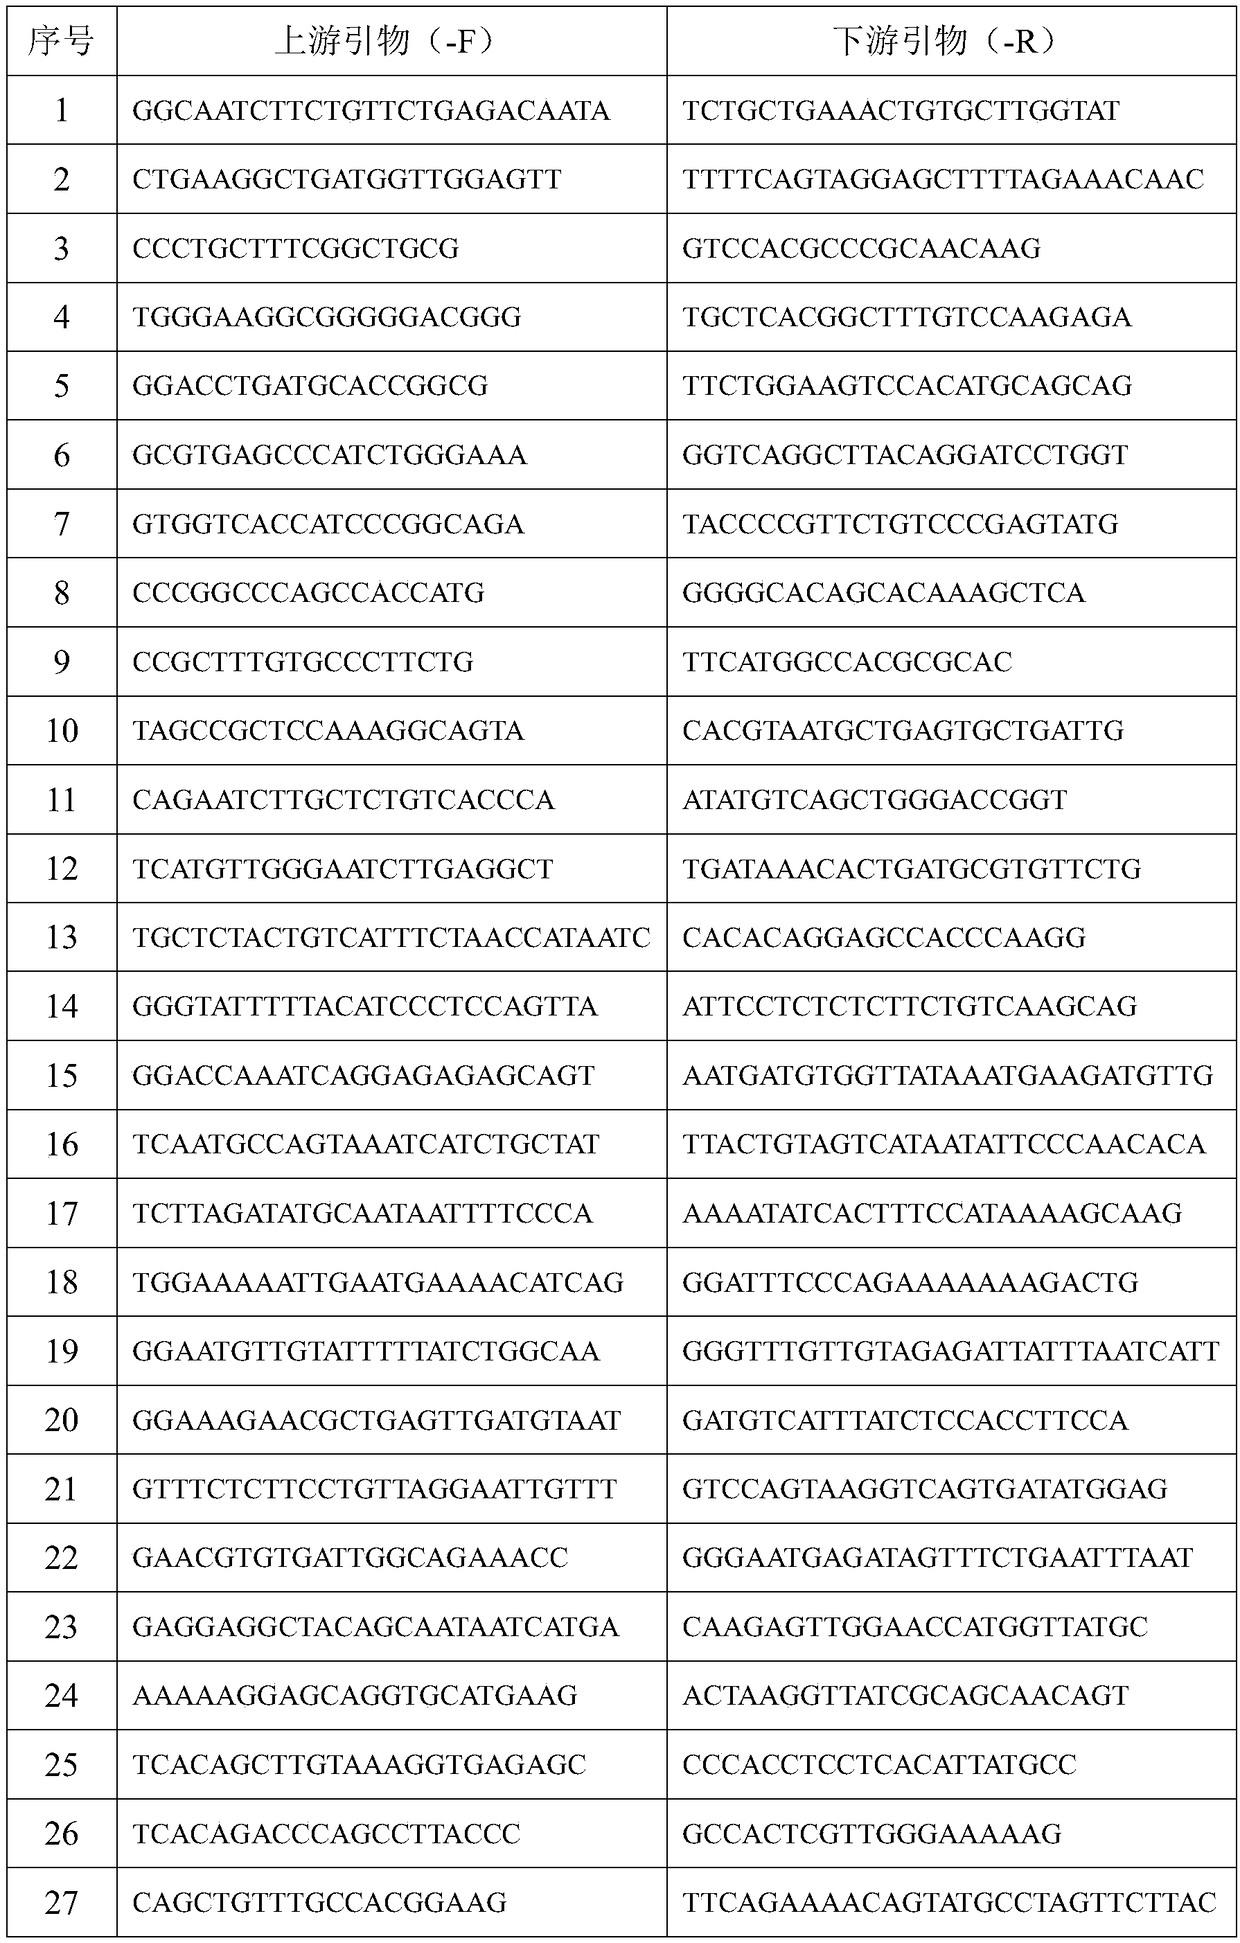 High-throughout sequencing method of genes relative to neurological and psychiatric drugs and application of high-throughout sequencing method